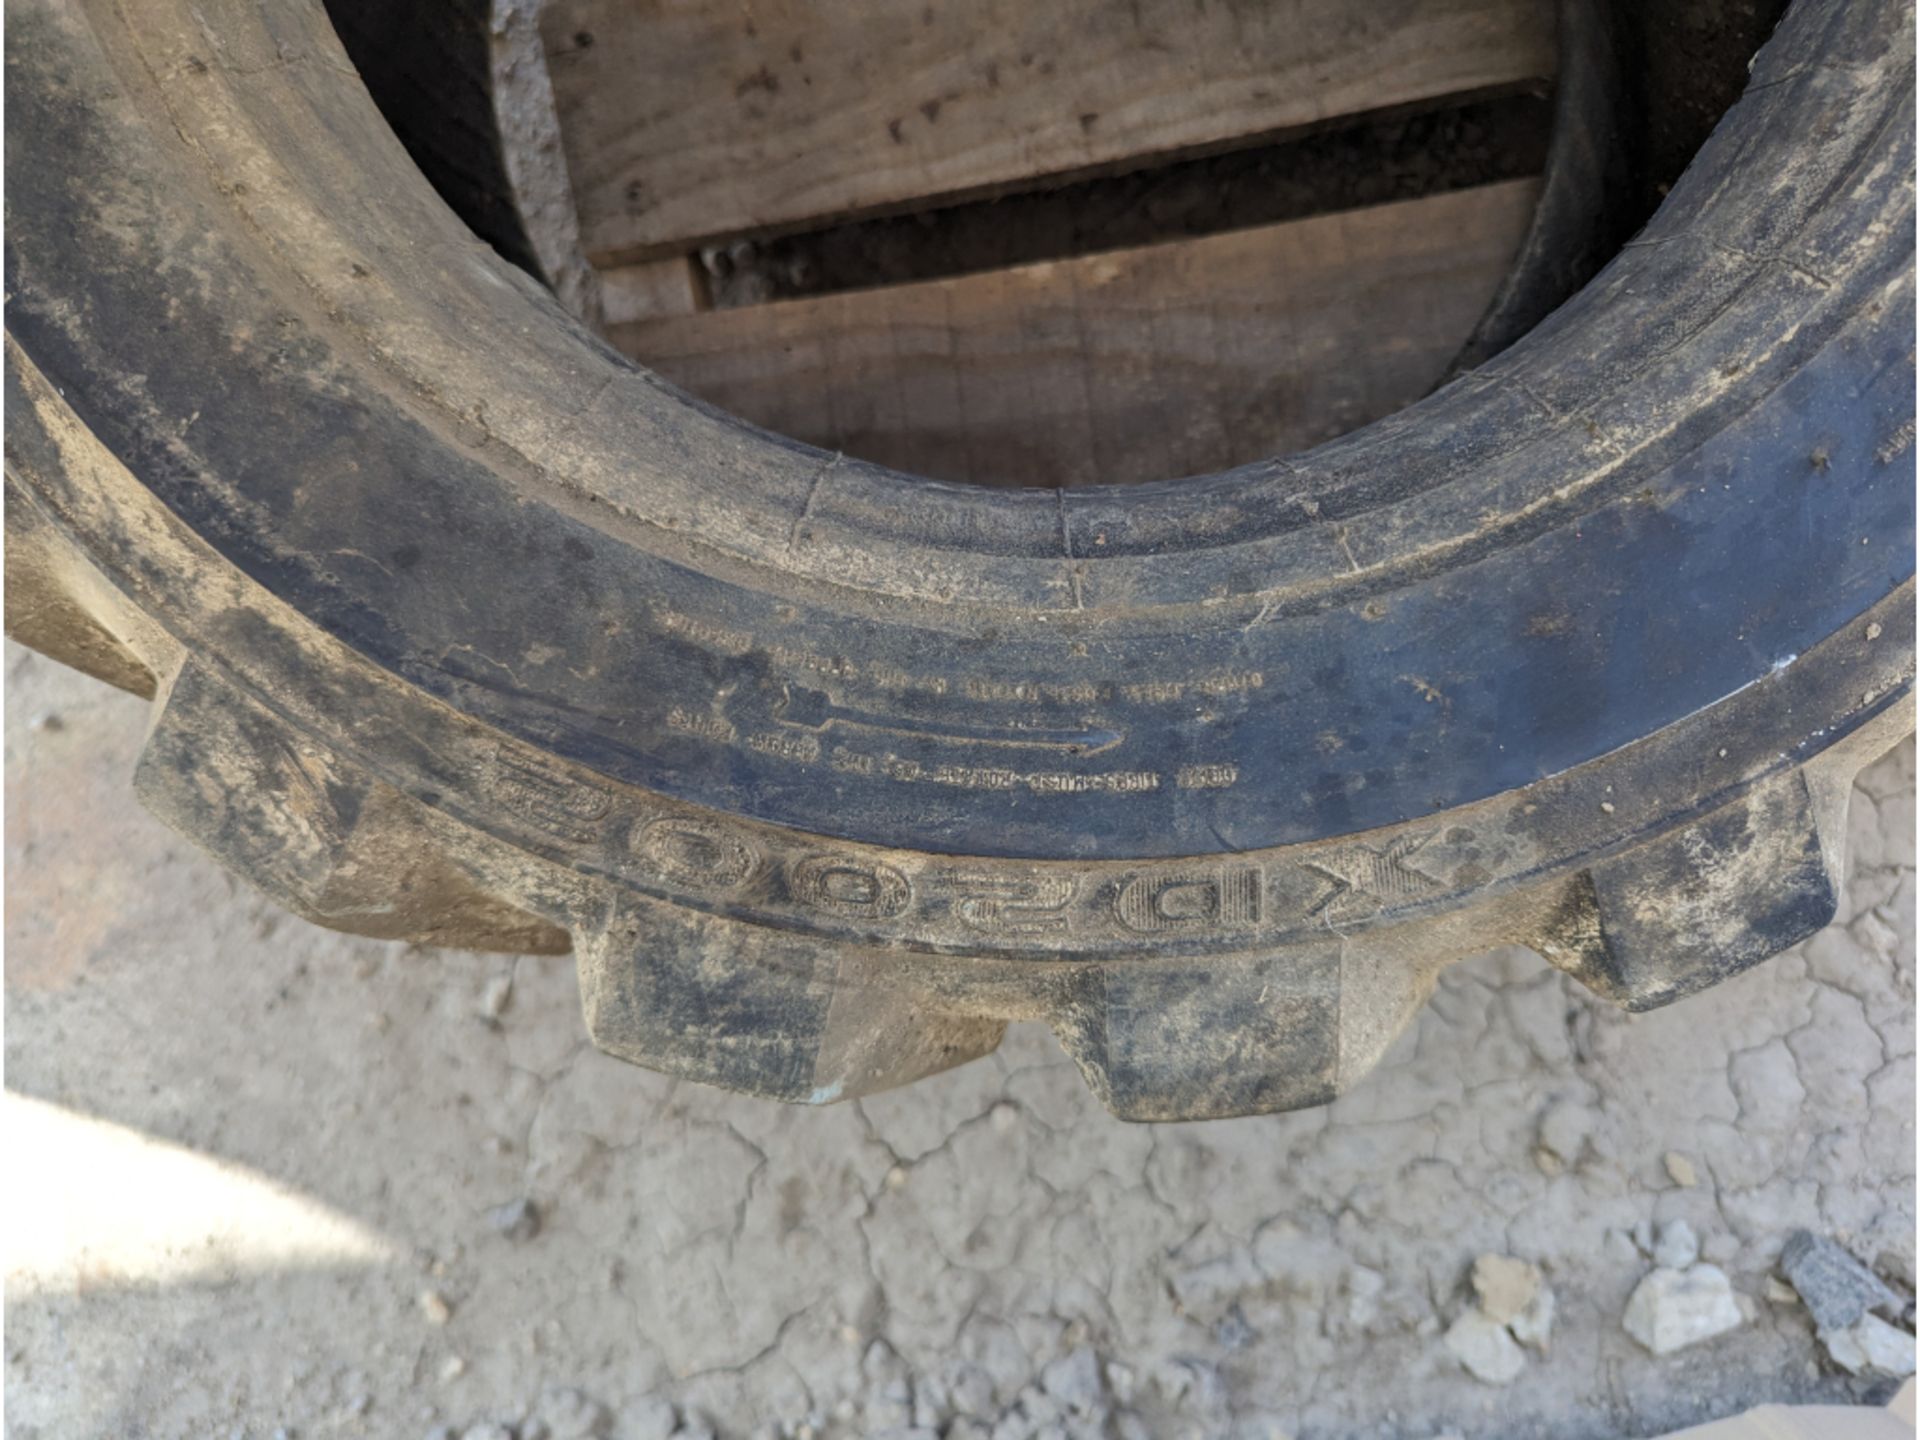 4 NEW Road Crew SKS-1 Skid Steer Tires, 1 Used Tire, 10-16.5 - Image 9 of 10